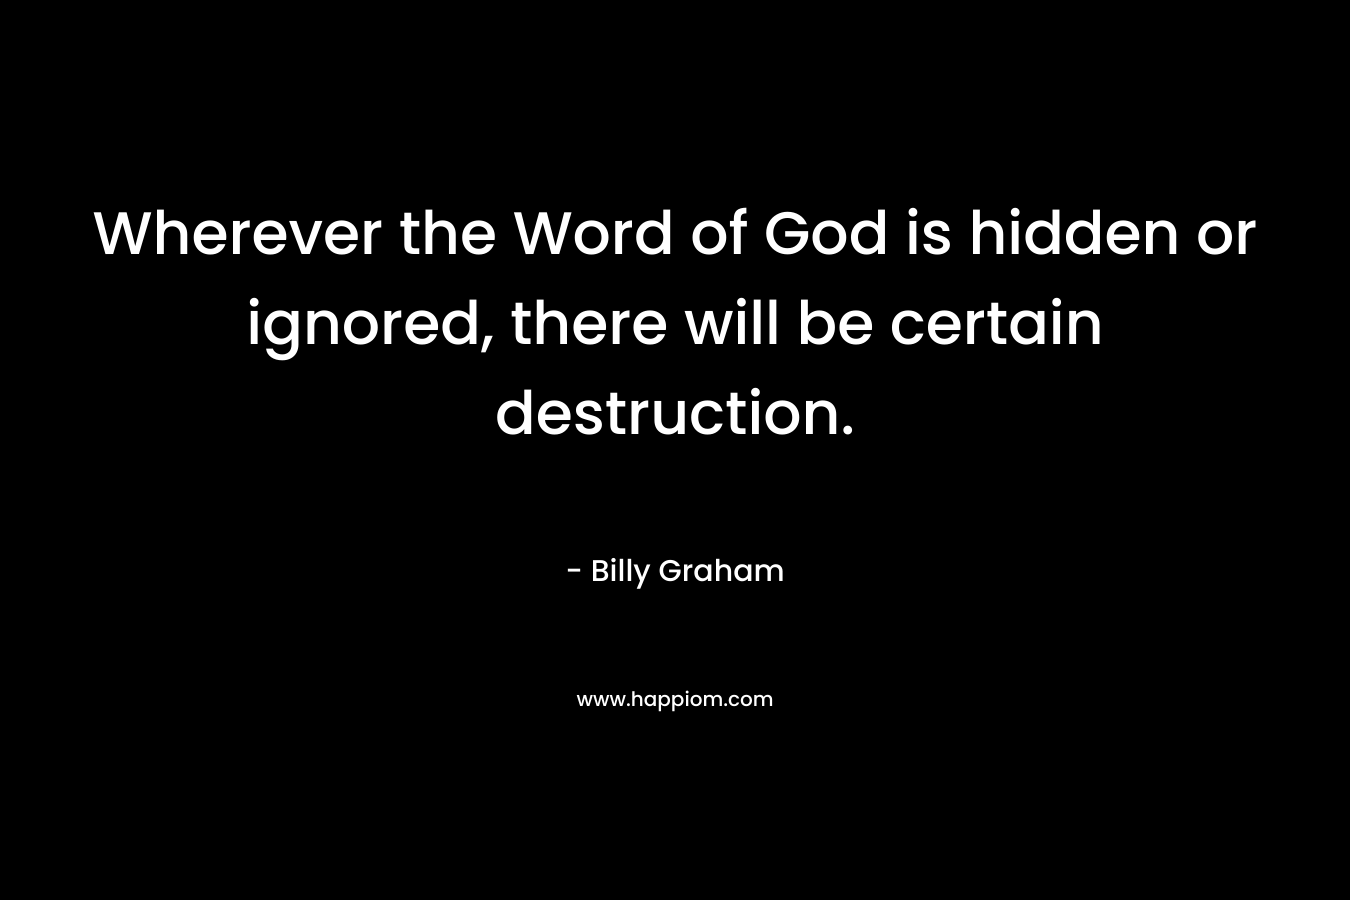 Wherever the Word of God is hidden or ignored, there will be certain destruction.